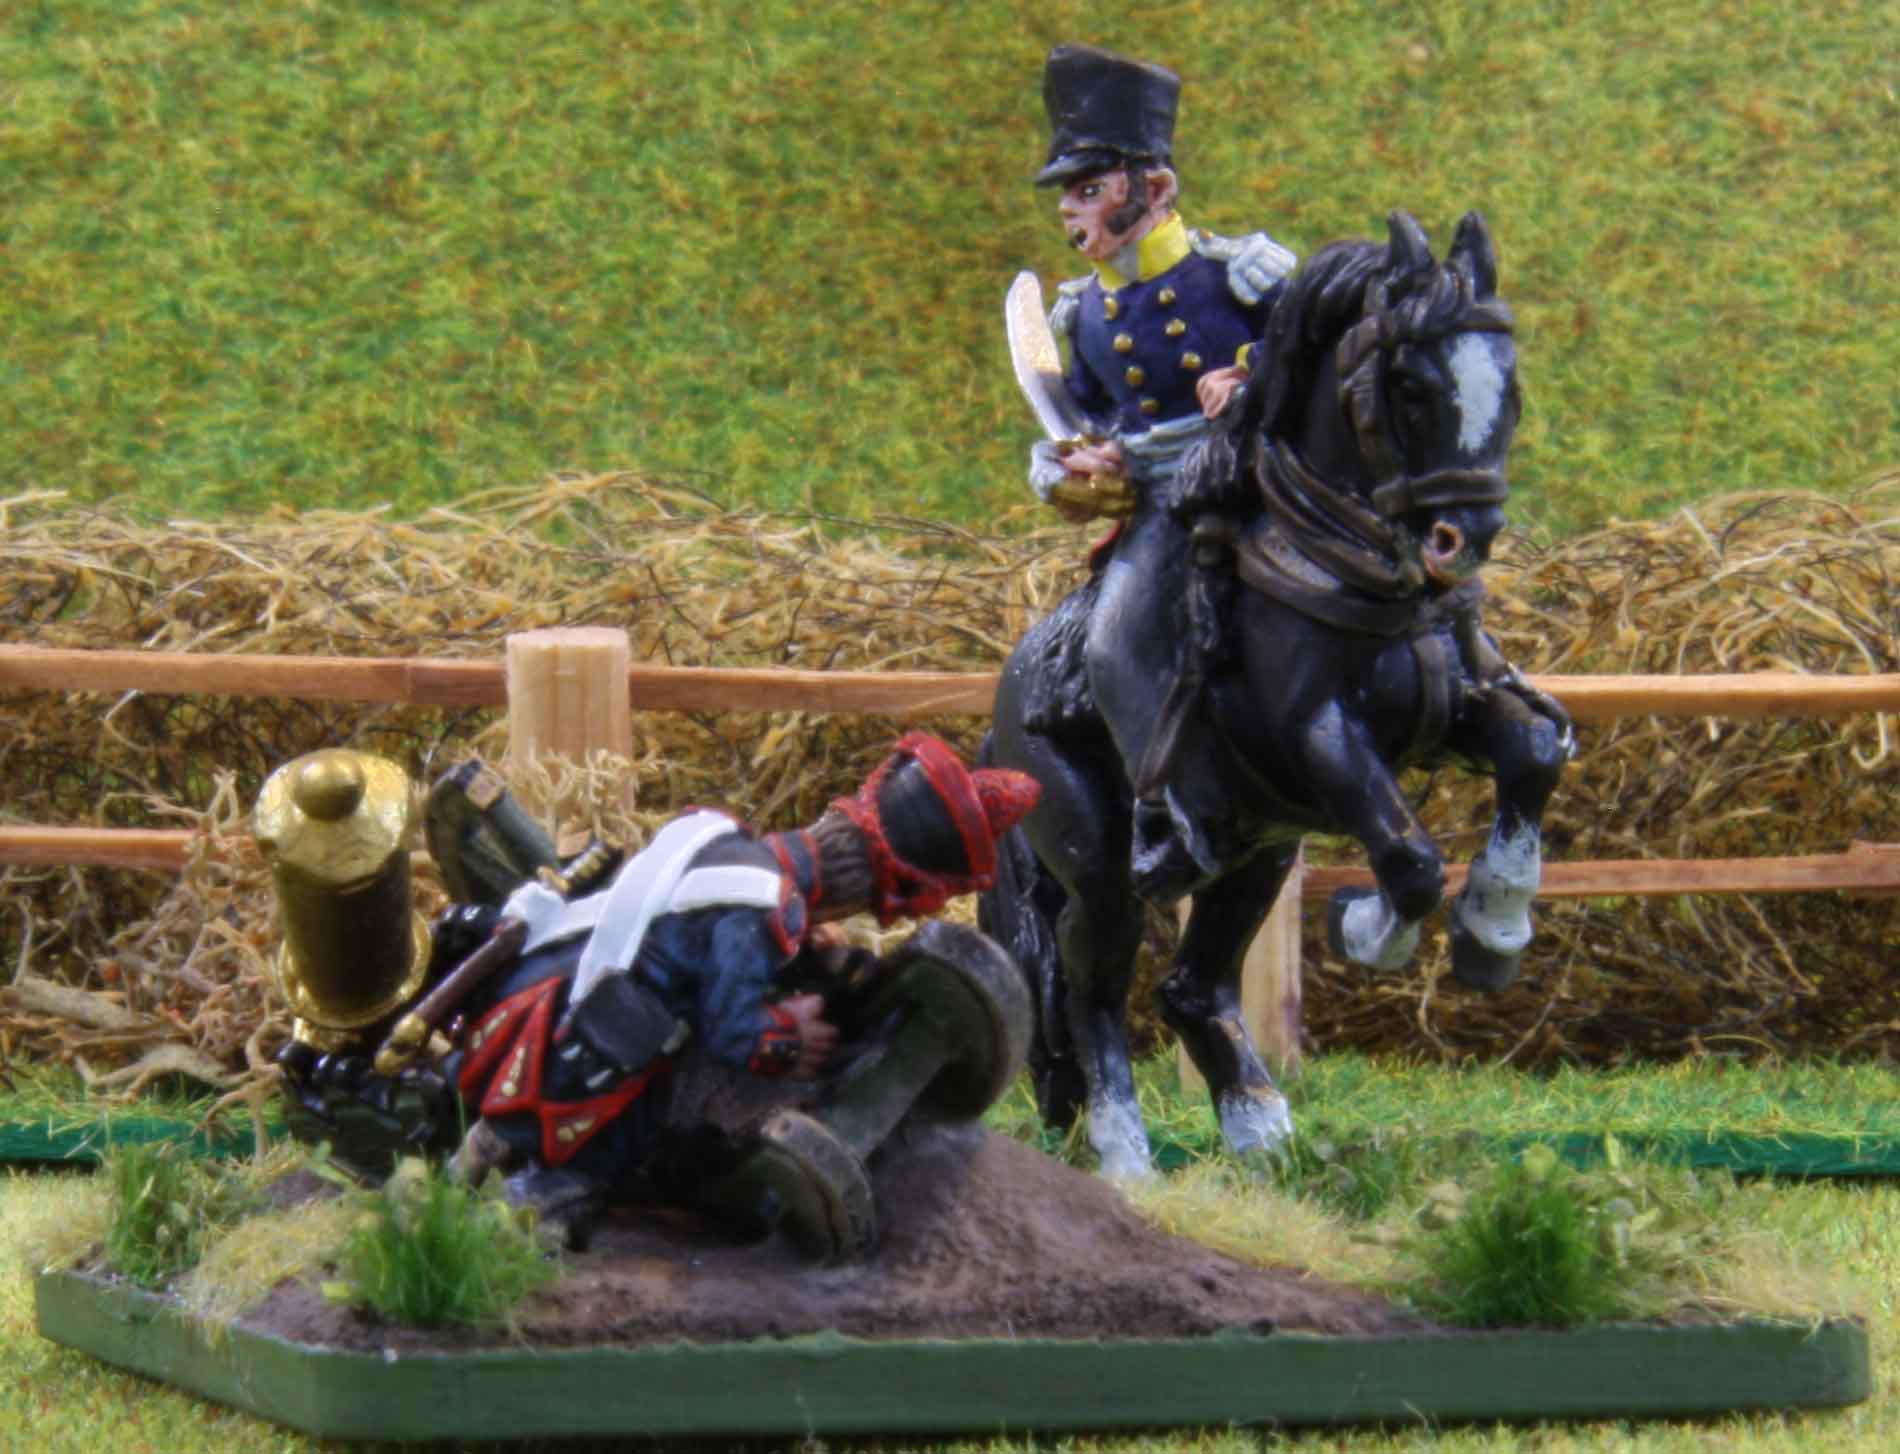 Prussian mounted infantry officer